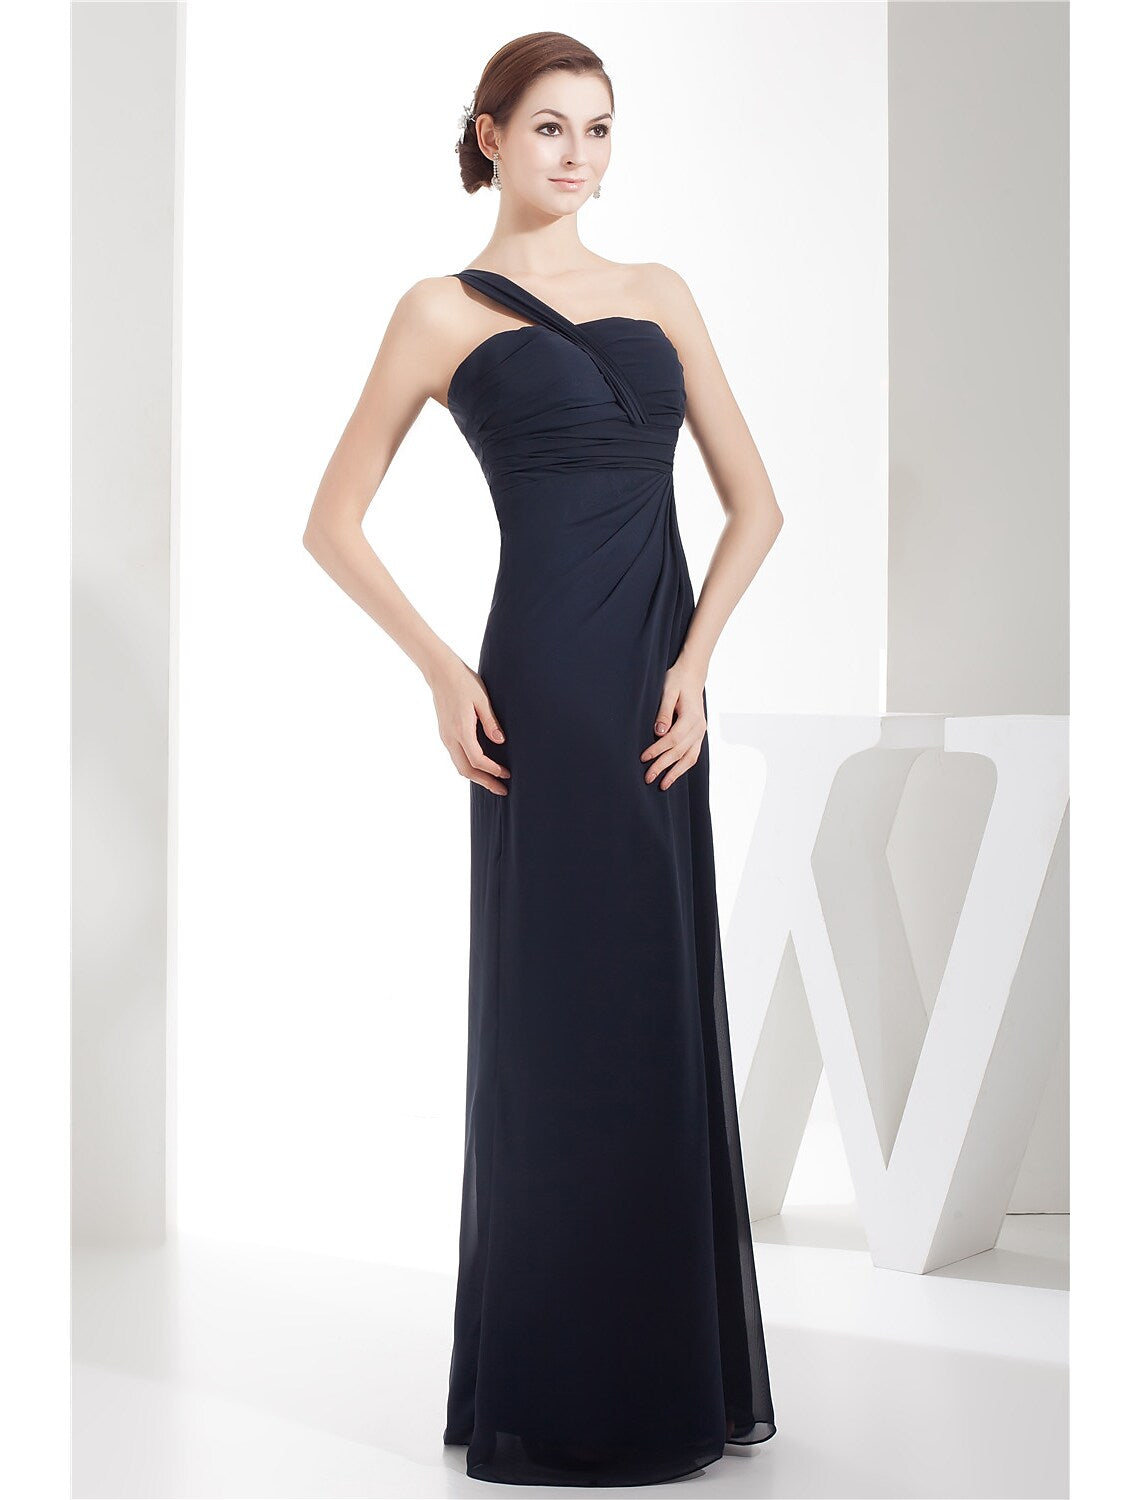 Evening Gown Dress Wedding Floor Length Sleeveless One Shoulder Chiffon with Ruched